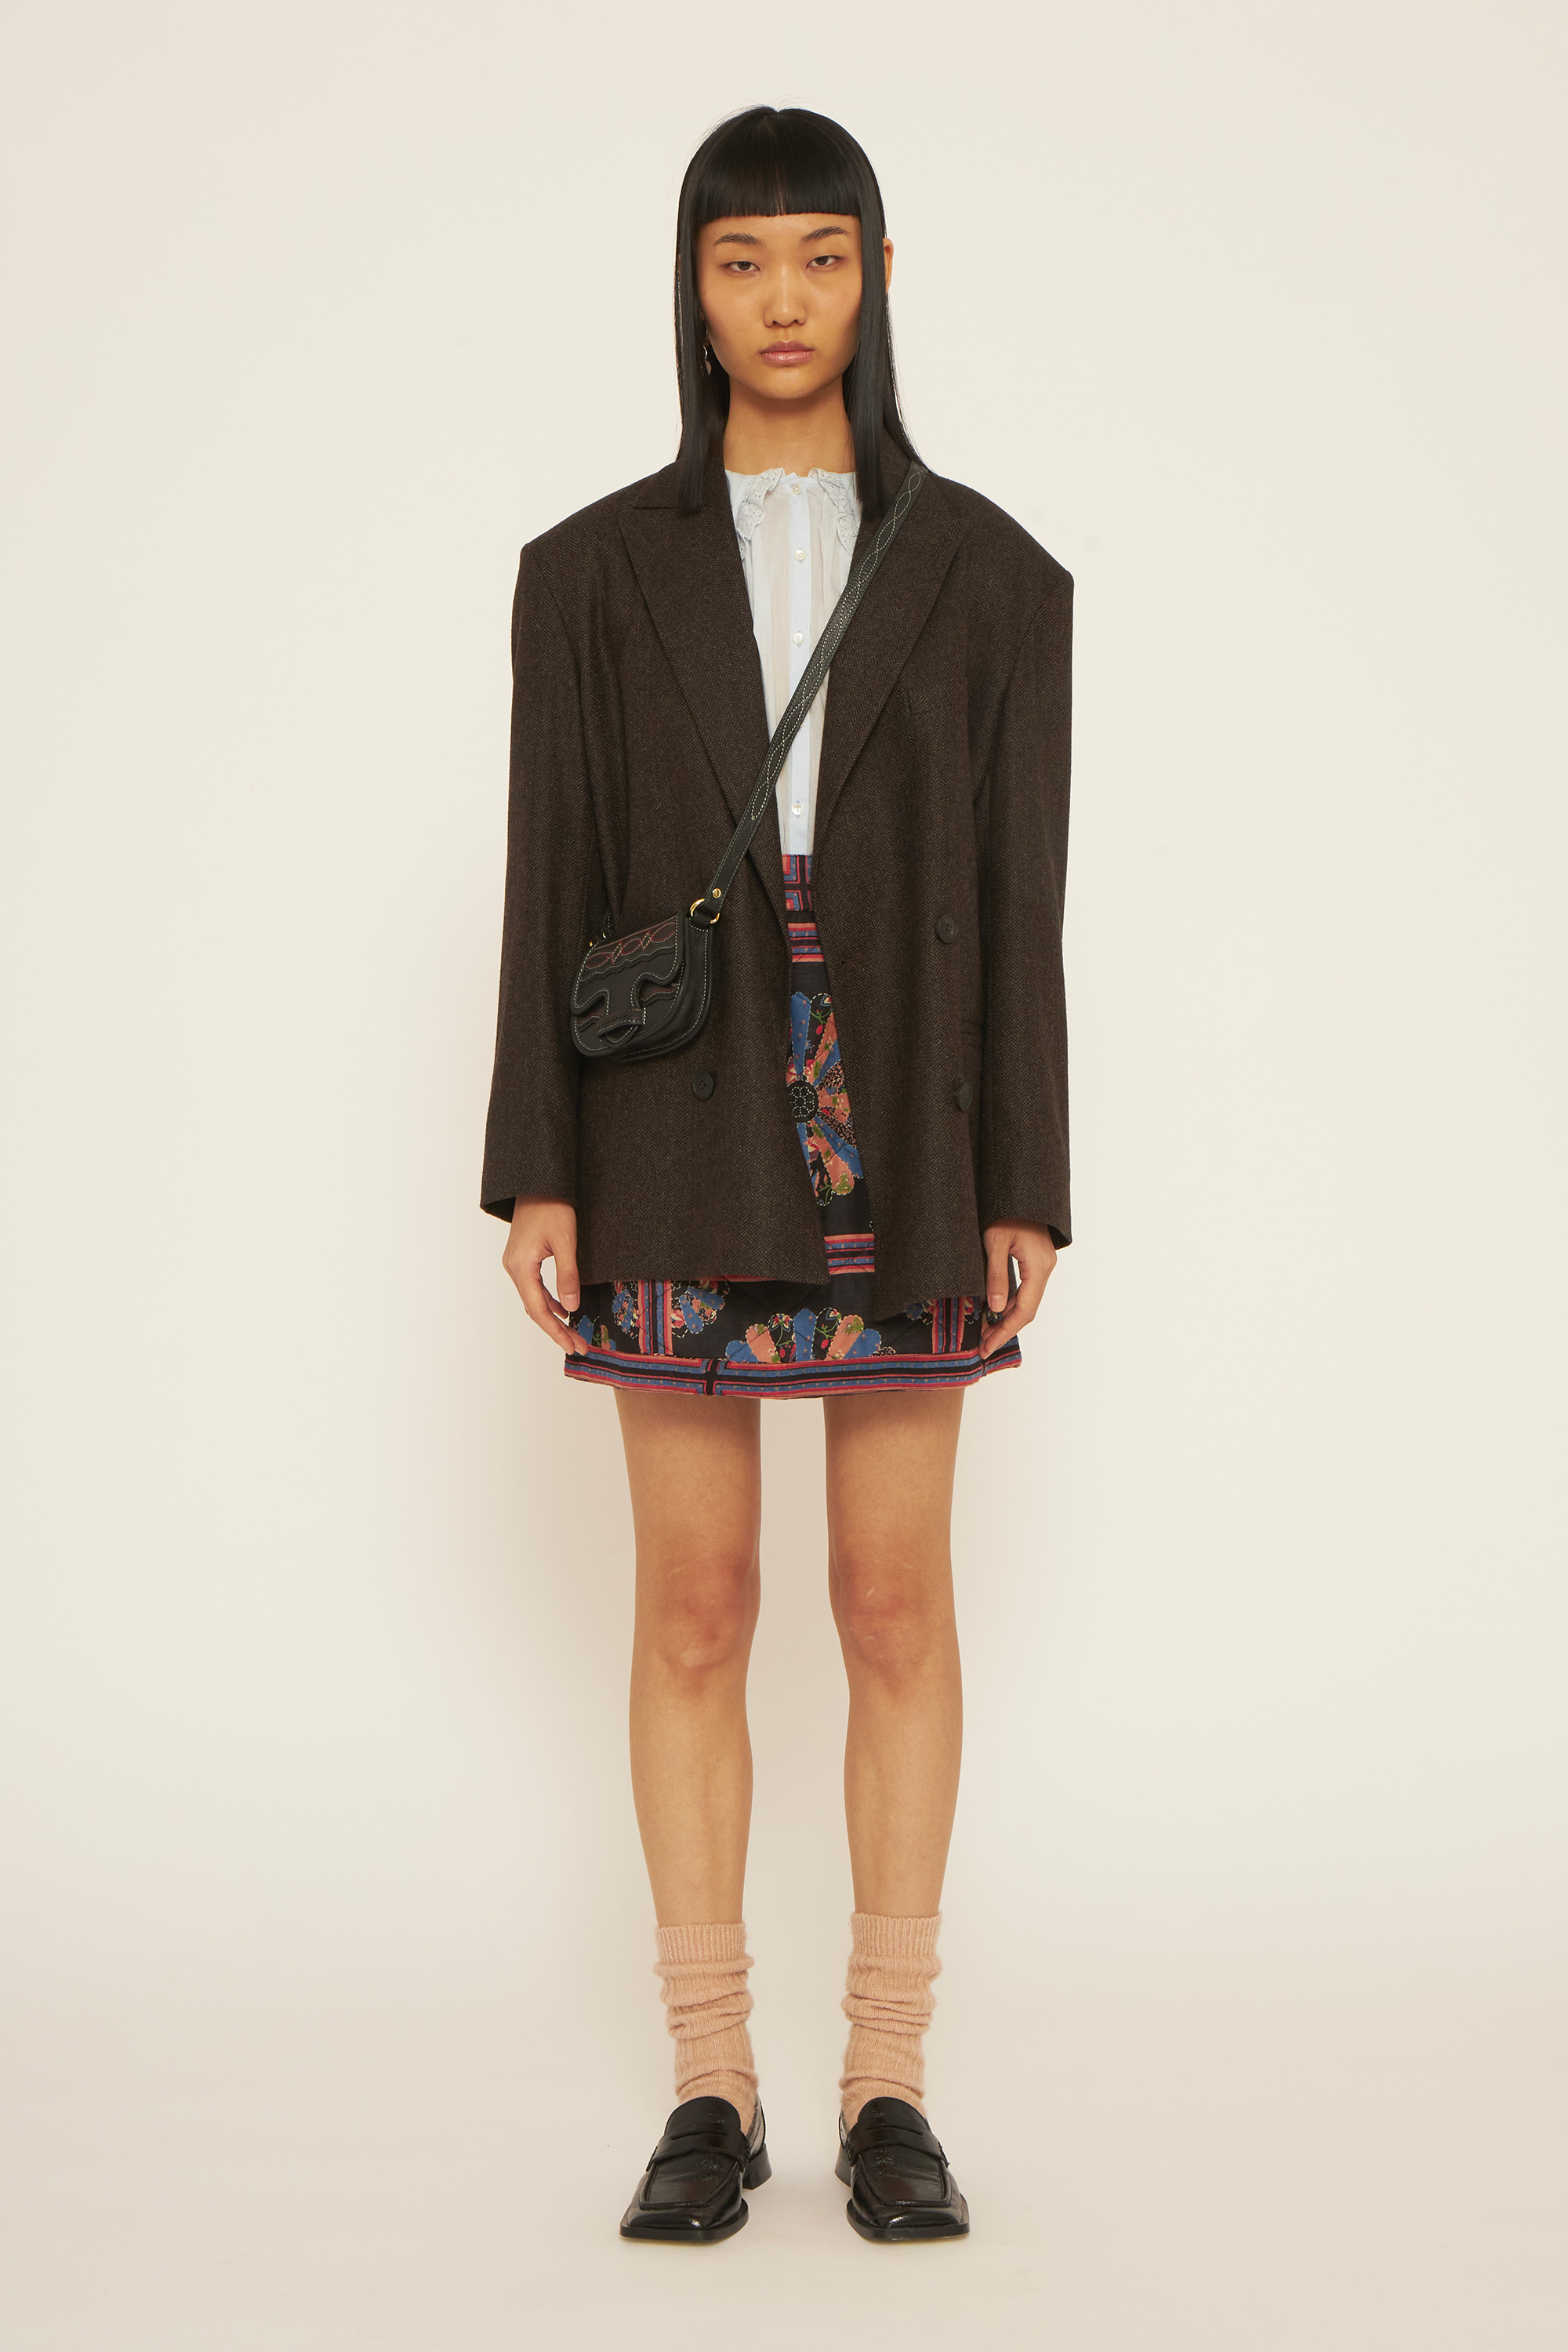 A girl wearing a brown jacket, a light blue delicate blouse, a printed skirt and a black bag.